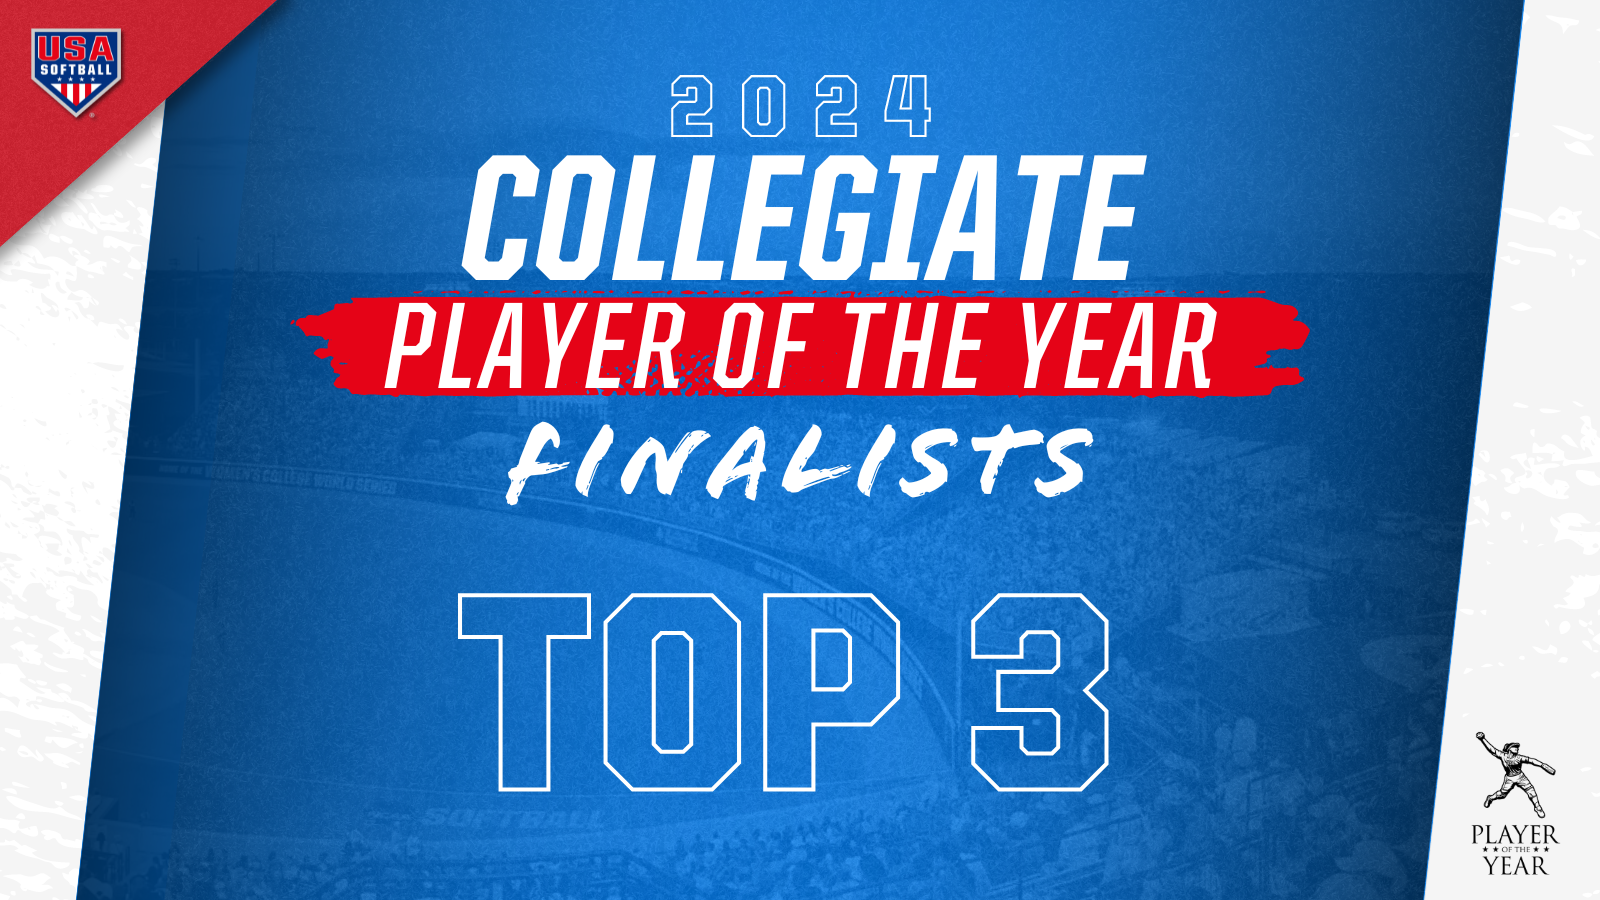 Top 3 Finalists announced for 2024 USA Softball Collegiate Player of the Year featured image